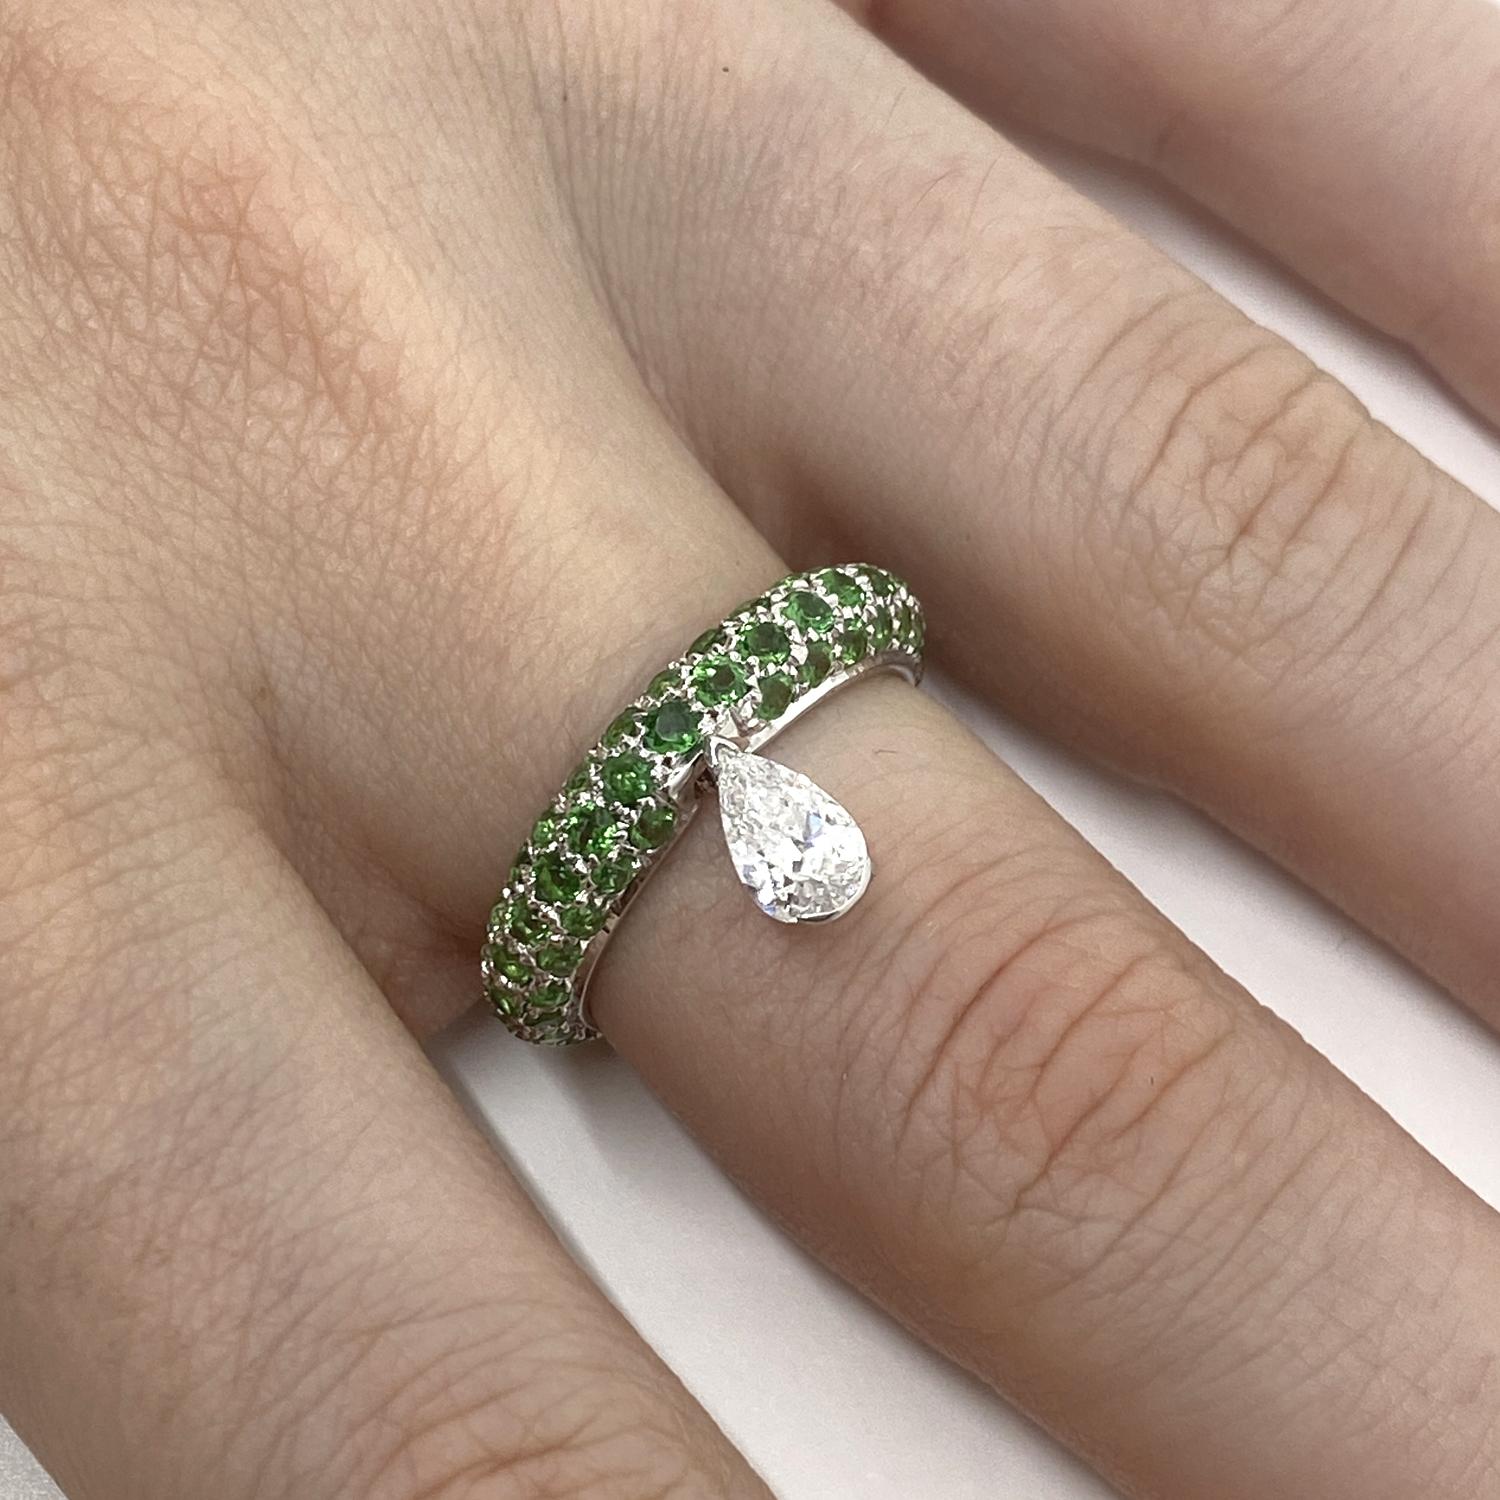 Ring made of 18kt white gold paved with natural brilliant-cut tsavorite for ct.2.22 and white drop-cut diamond for ct.0.46

Welcome to our jewelry collection, where every piece tells a story of timeless elegance and unparalleled craftsmanship. As a